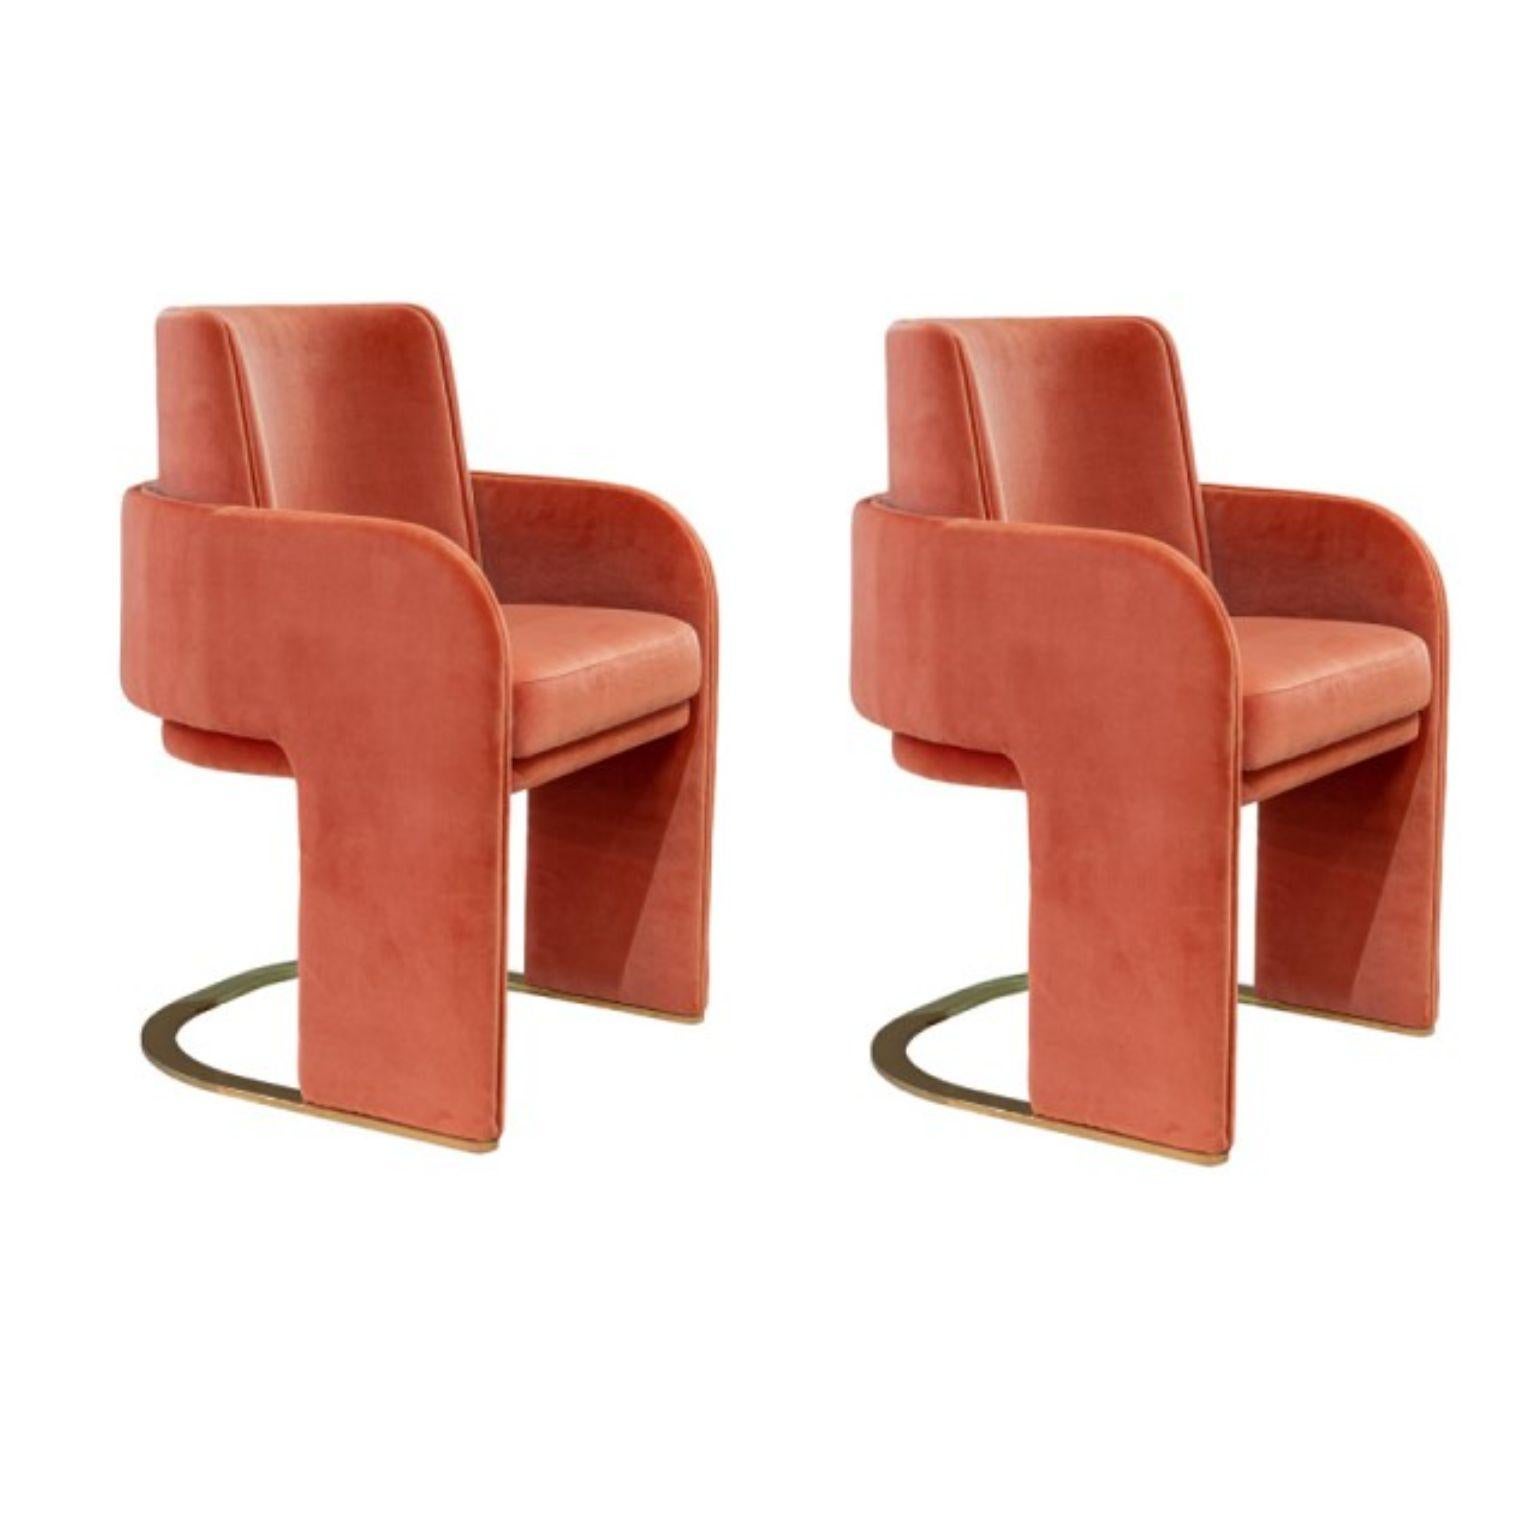 Set of 2 odisseia chairs by Dooq
Dimensions: W 56 x D 57 x H 85 cm
Materials: Leather or fabric, stainless steel plated polished or satin: brass, copper or nickel

Odisseia chair embodies the aesthetic spirit of the space age, a new kind of